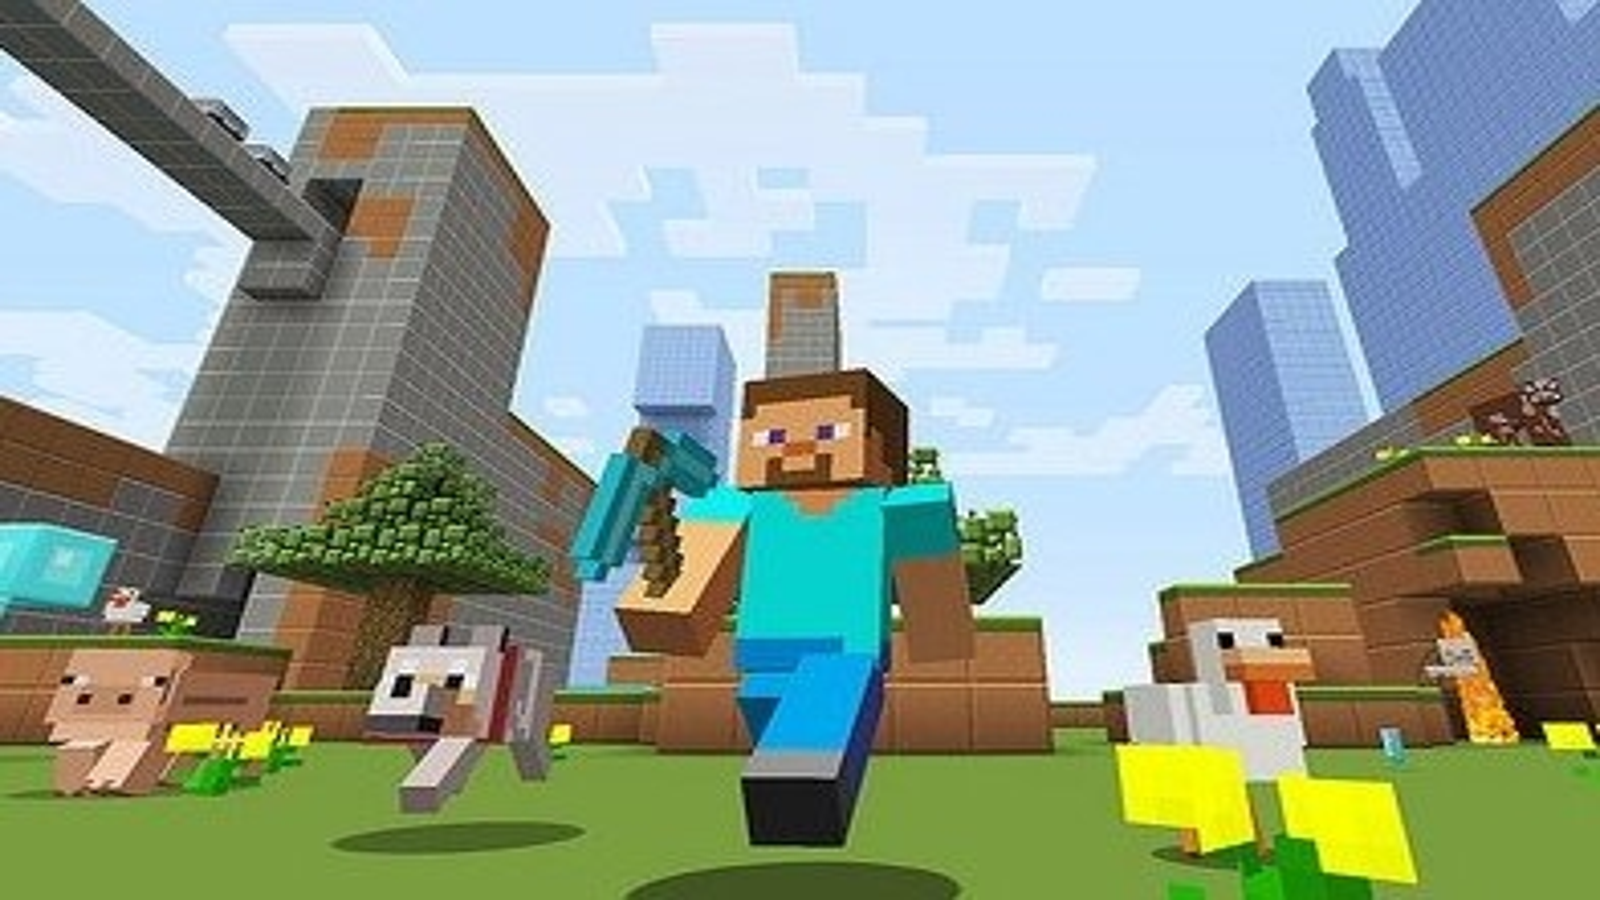 News - Minecraft: Xbox 360 Edition Finally Gets Its Release Date